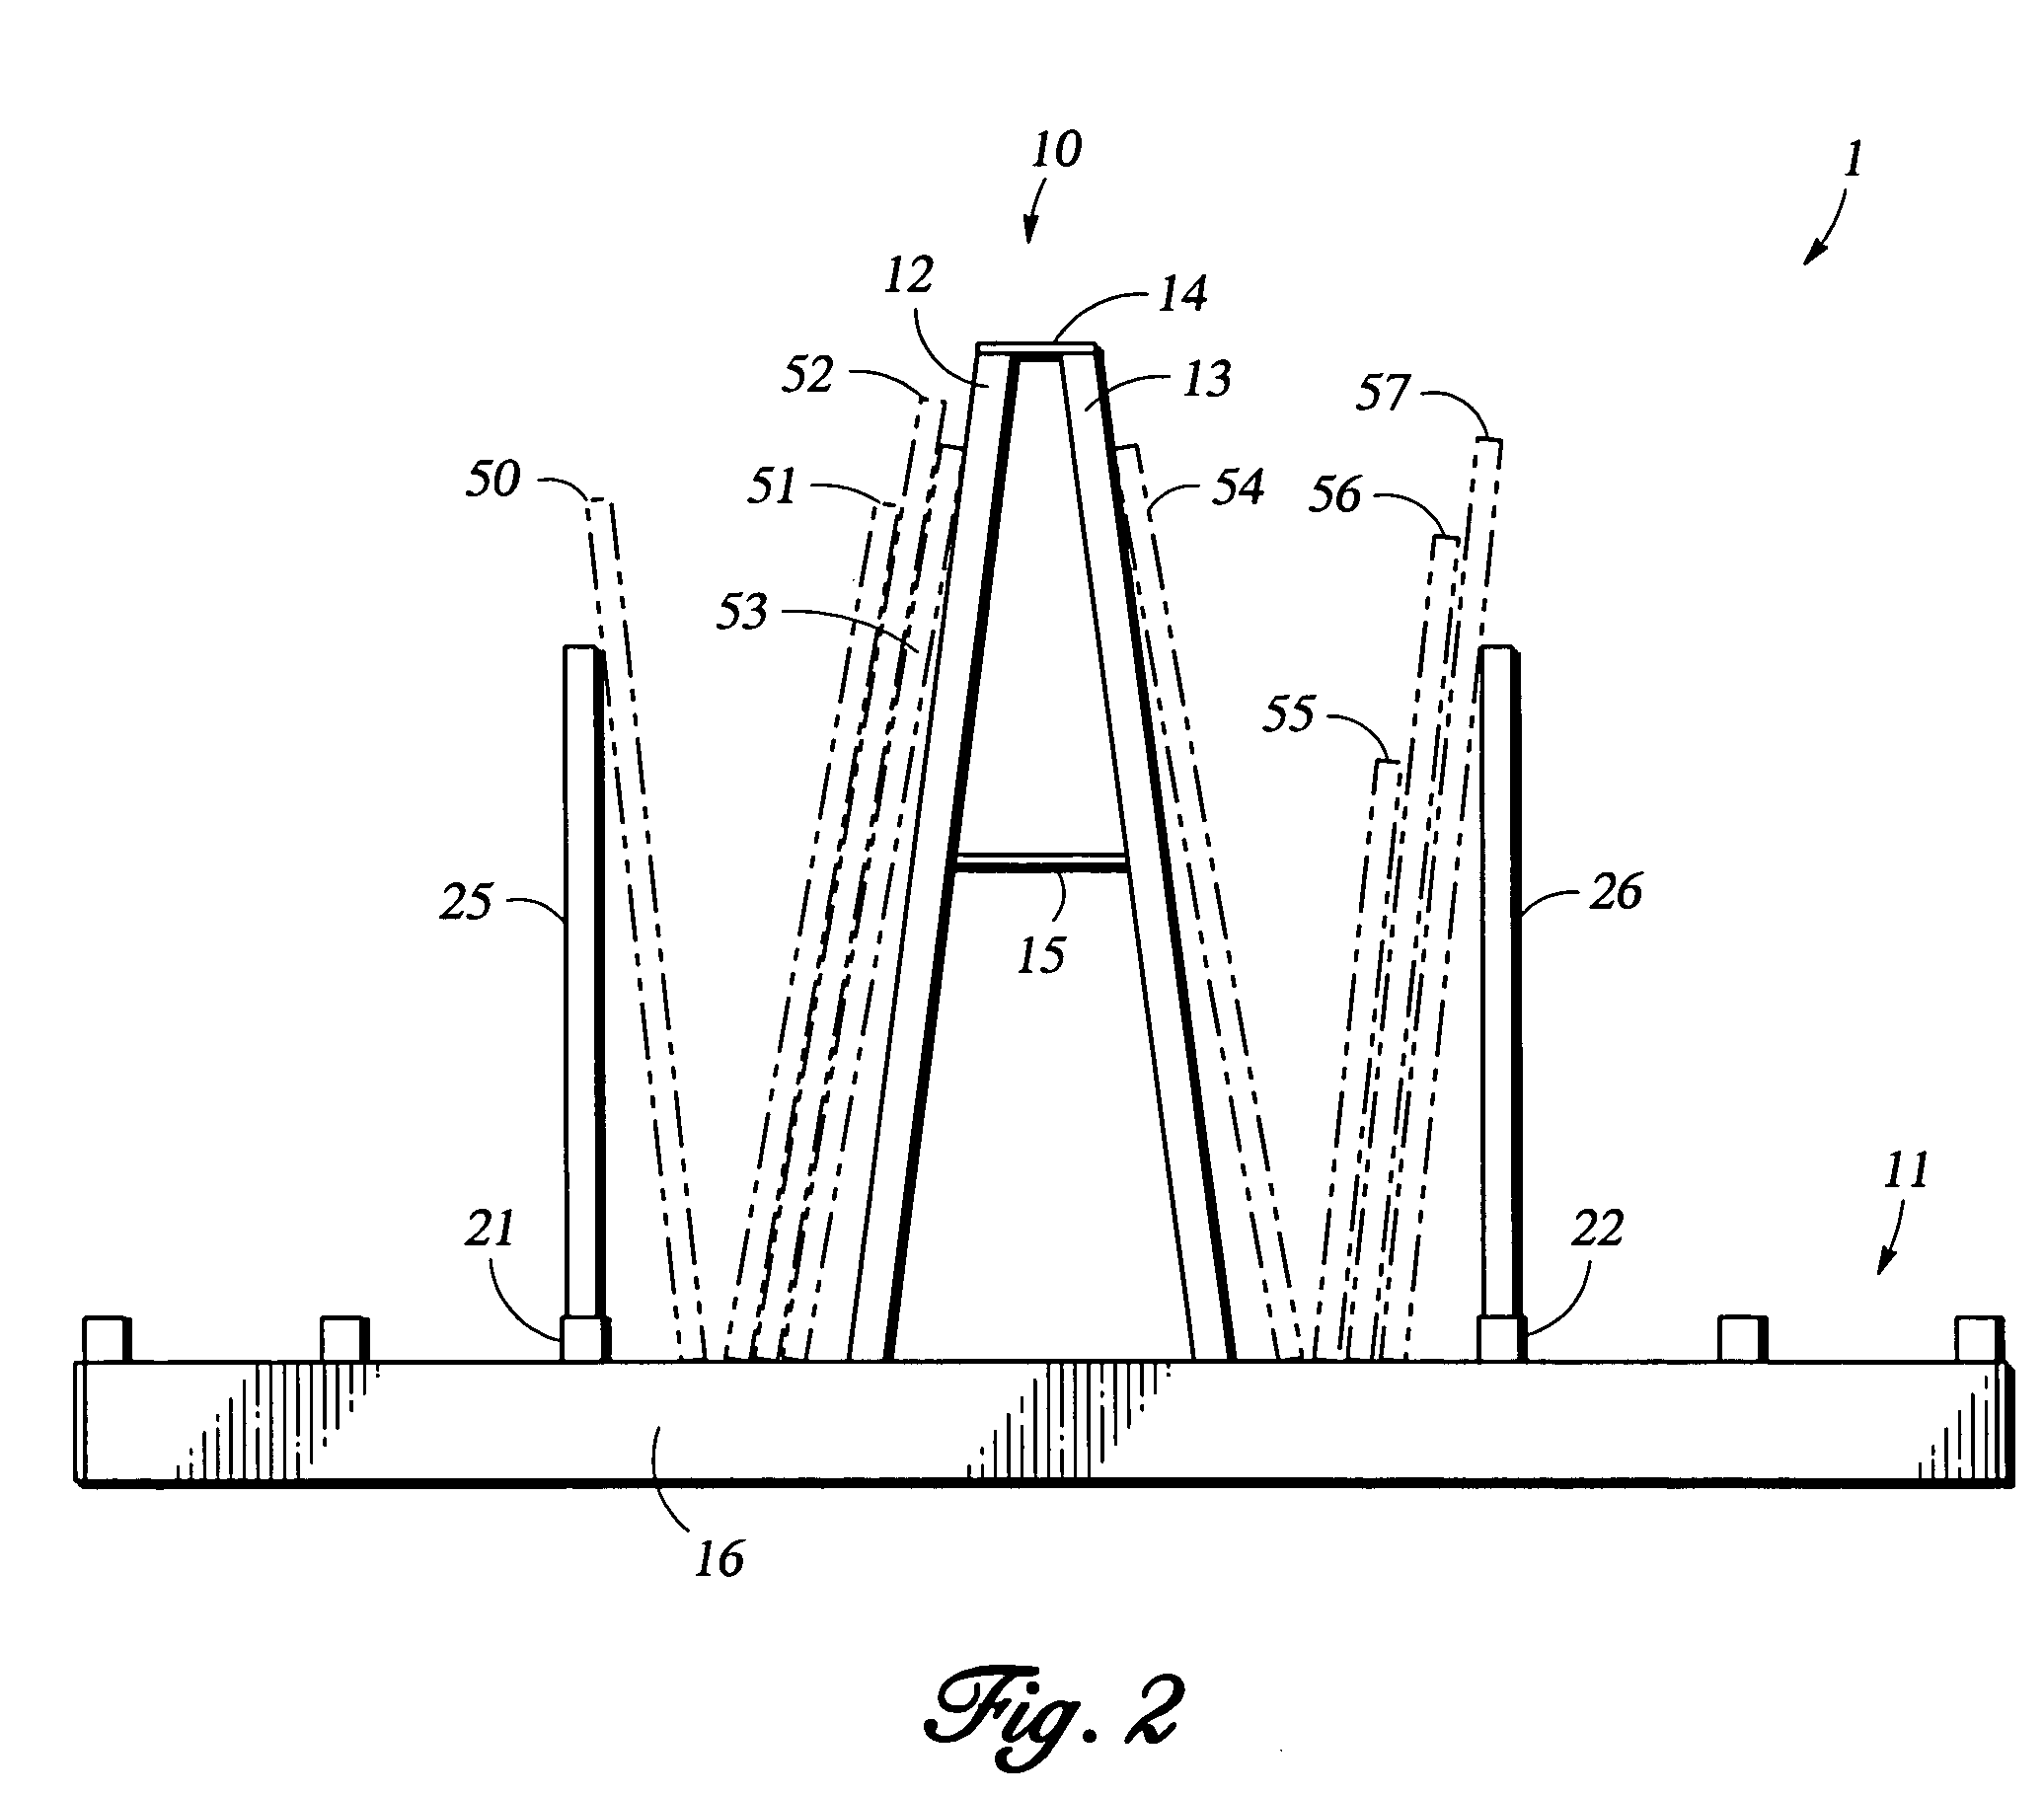 Supports for storing sheets of granite, stone, glass, and other materials